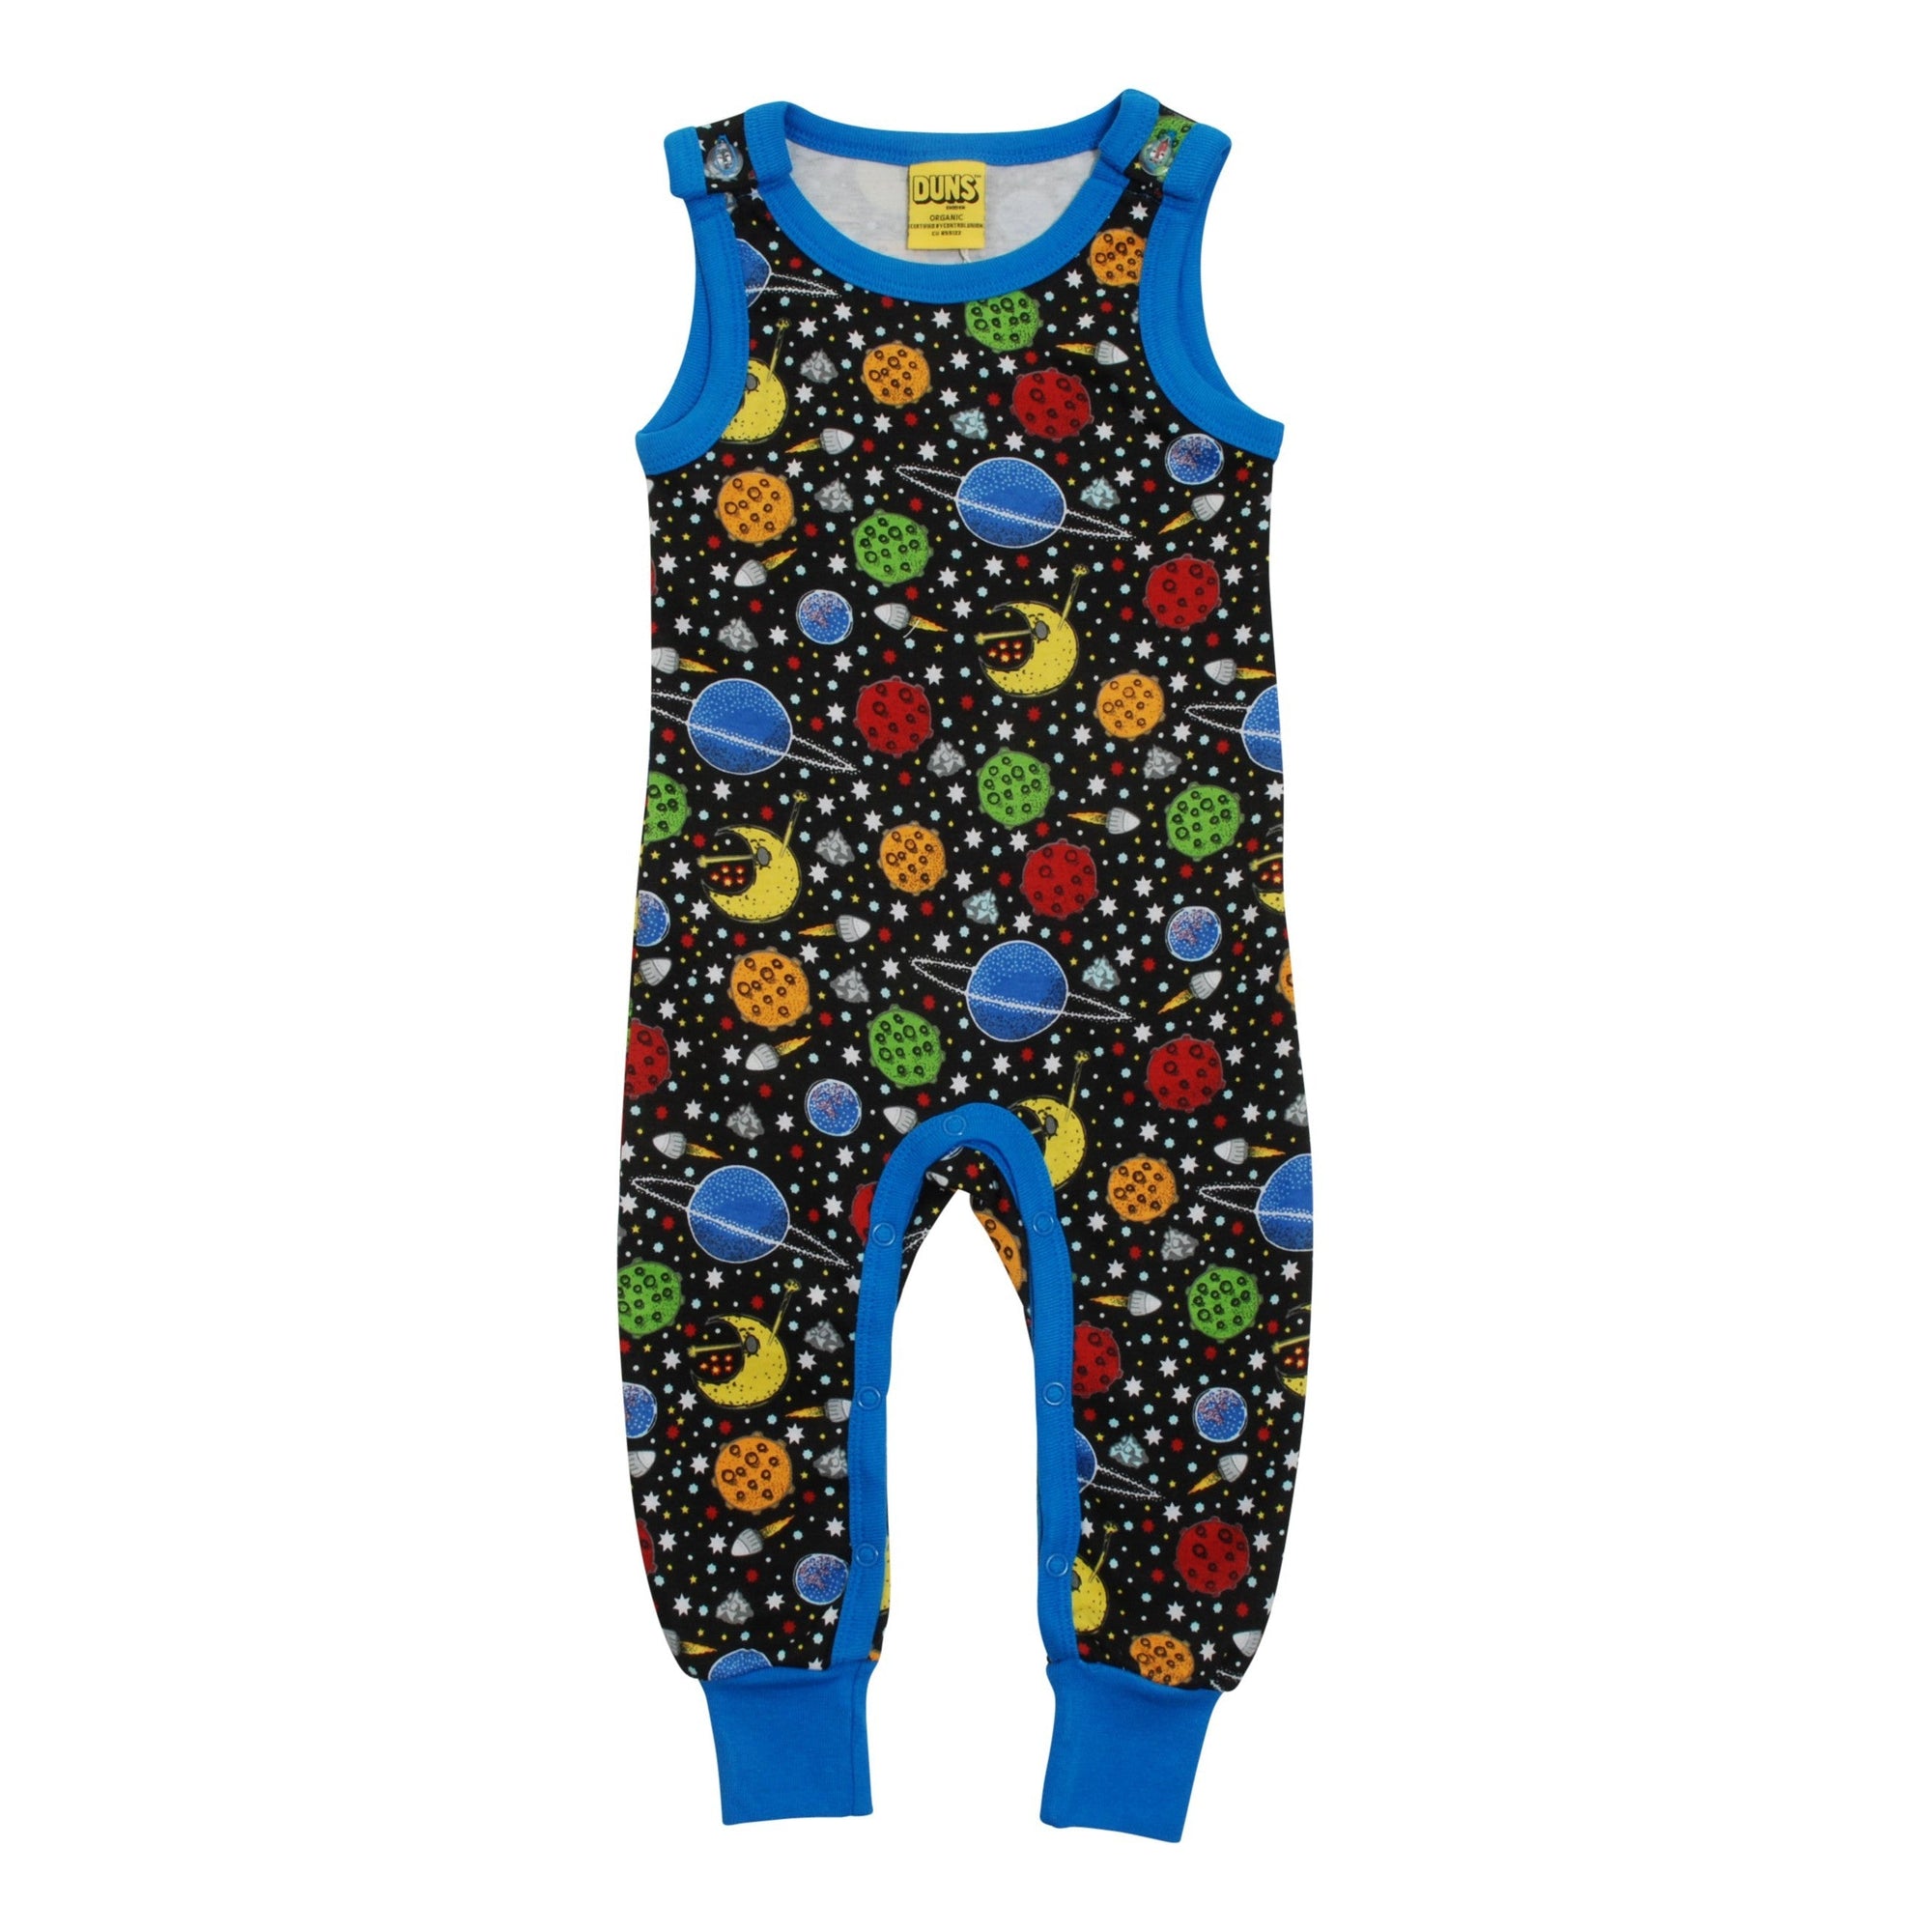 Space Dungarees - 1 Left Size 3-4 years-Duns Sweden-Modern Rascals